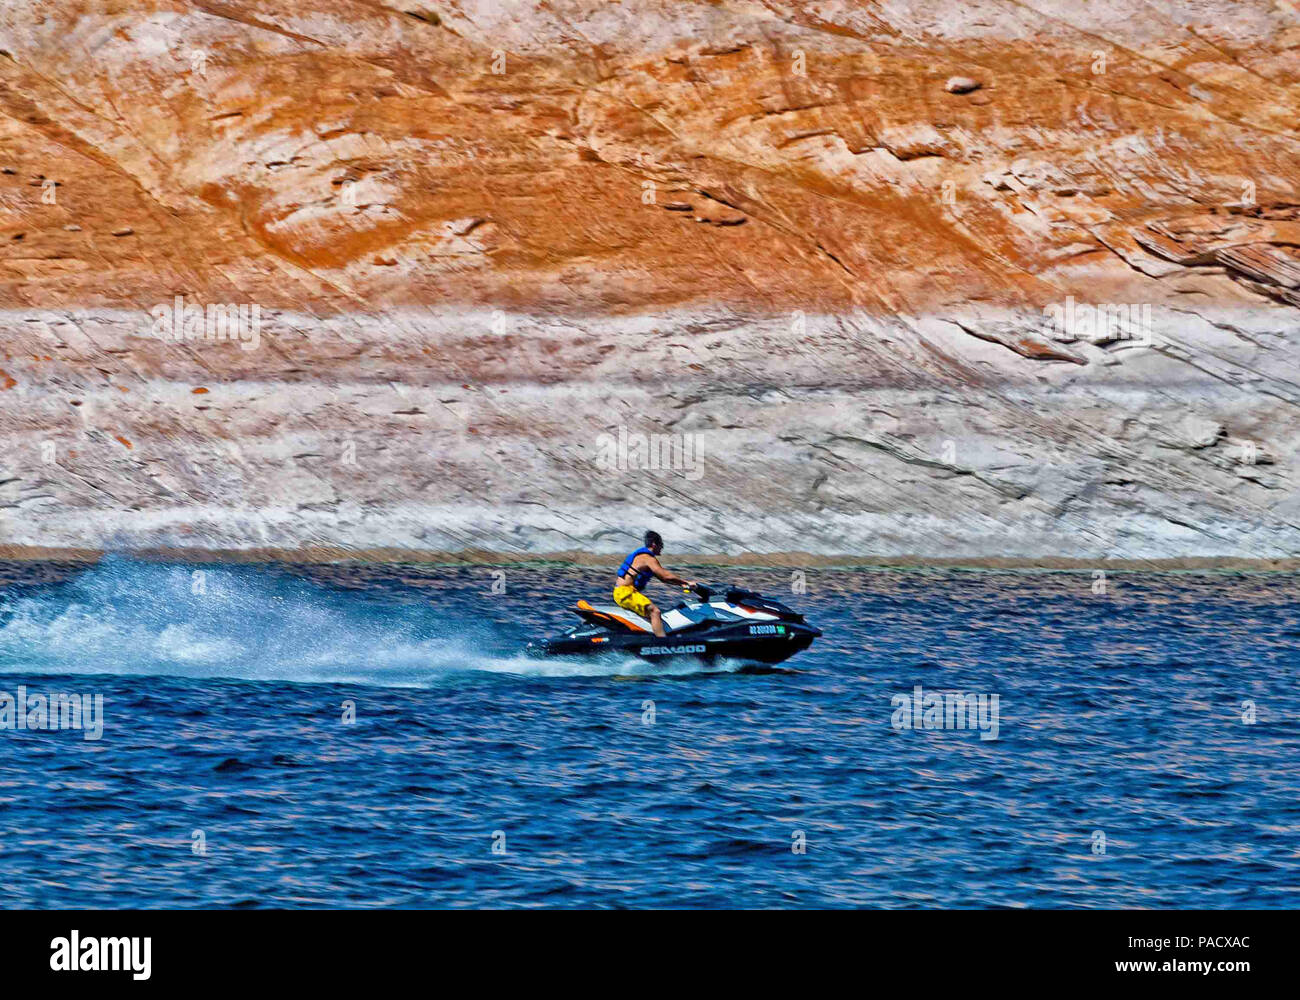 Arizona, USA. 31st May, 2018. A vacationer jet skiing in colorful Antelope Slot Canyon. A narrow, curving, high-walled side arm of Lake Powell, and a favorite tourist attraction, the towering Navajo Sandstone geologically formed walls have red and burnt orange rocks, and are hundreds of feet high. Credit: Arnold Drapkin/ZUMA Wire/Alamy Live News Stock Photo